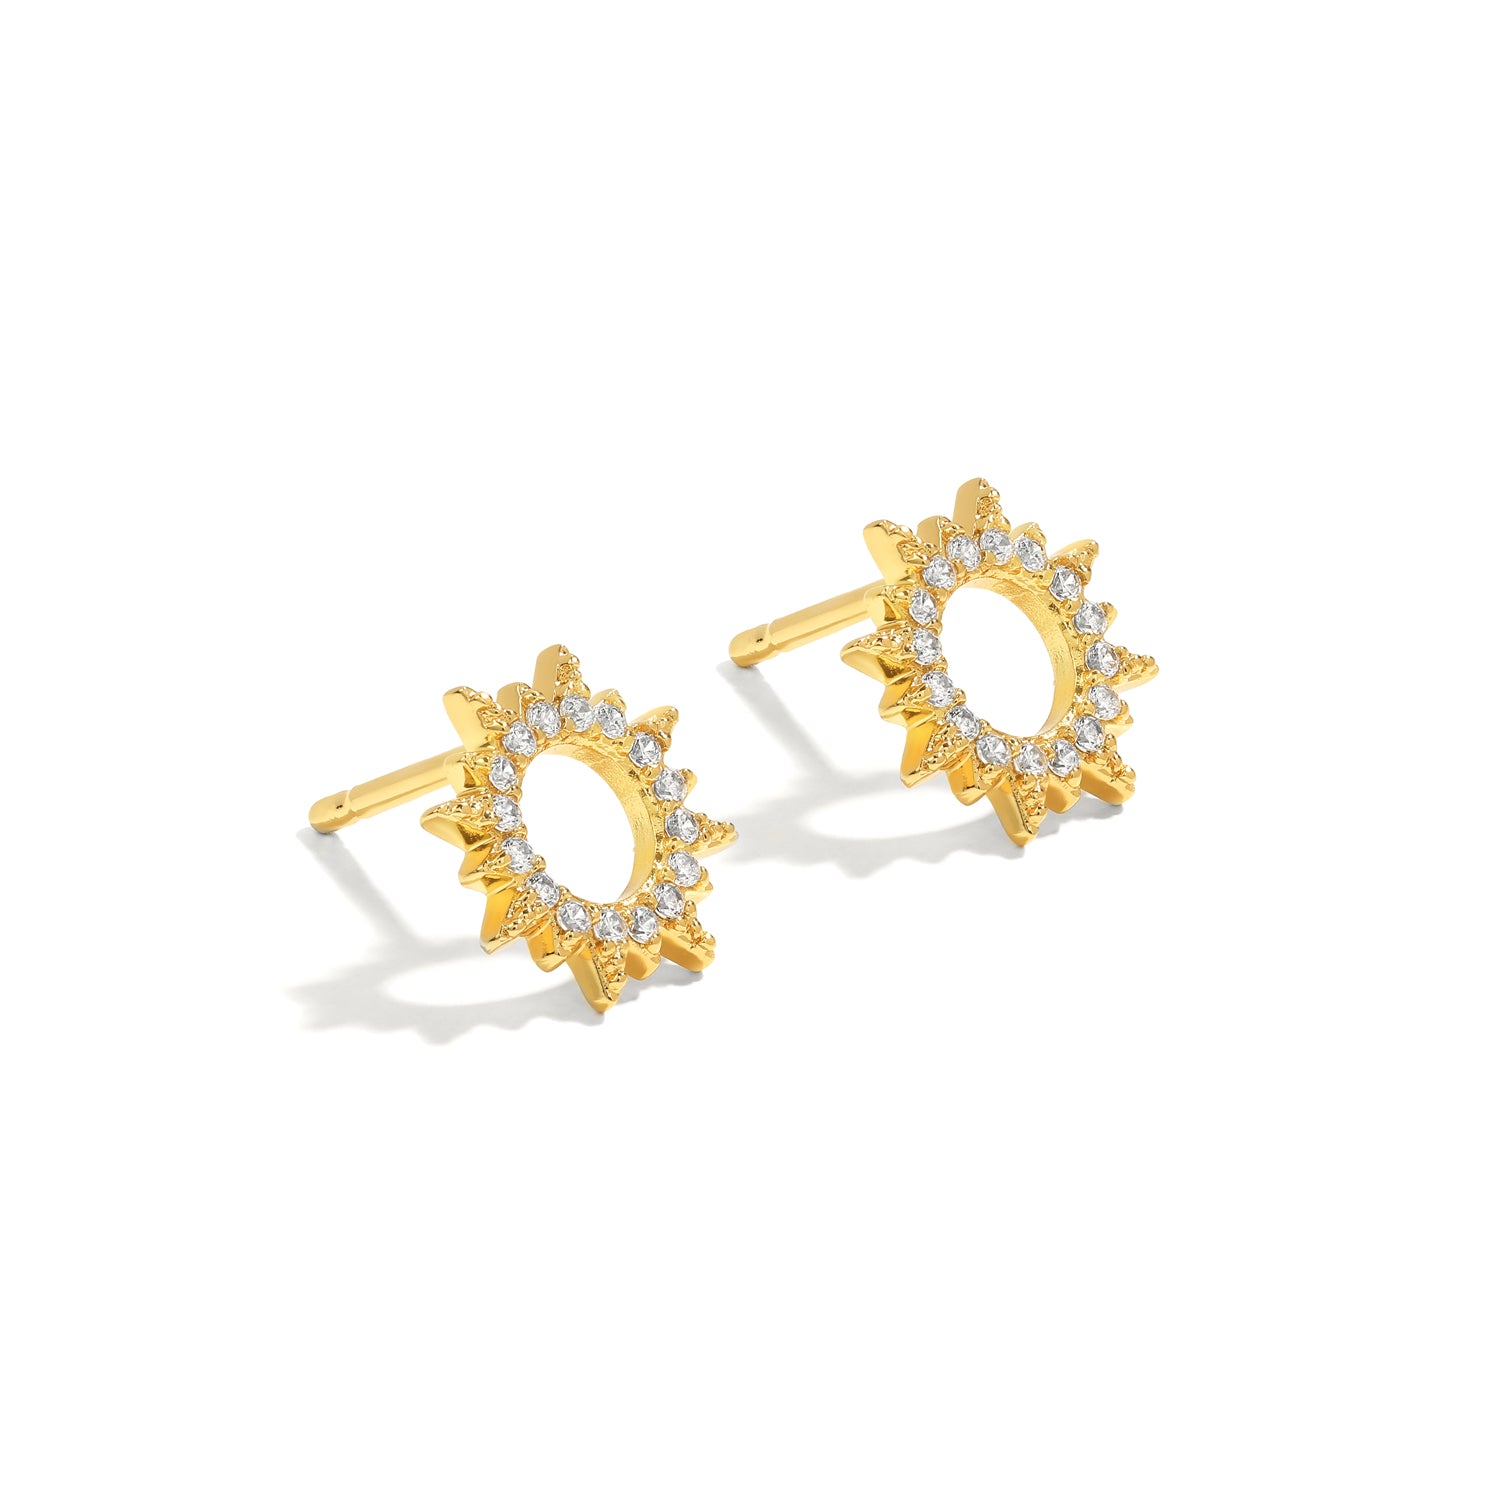 Elegant and statement studs. Gold earrings set with cubic zirconia stones.